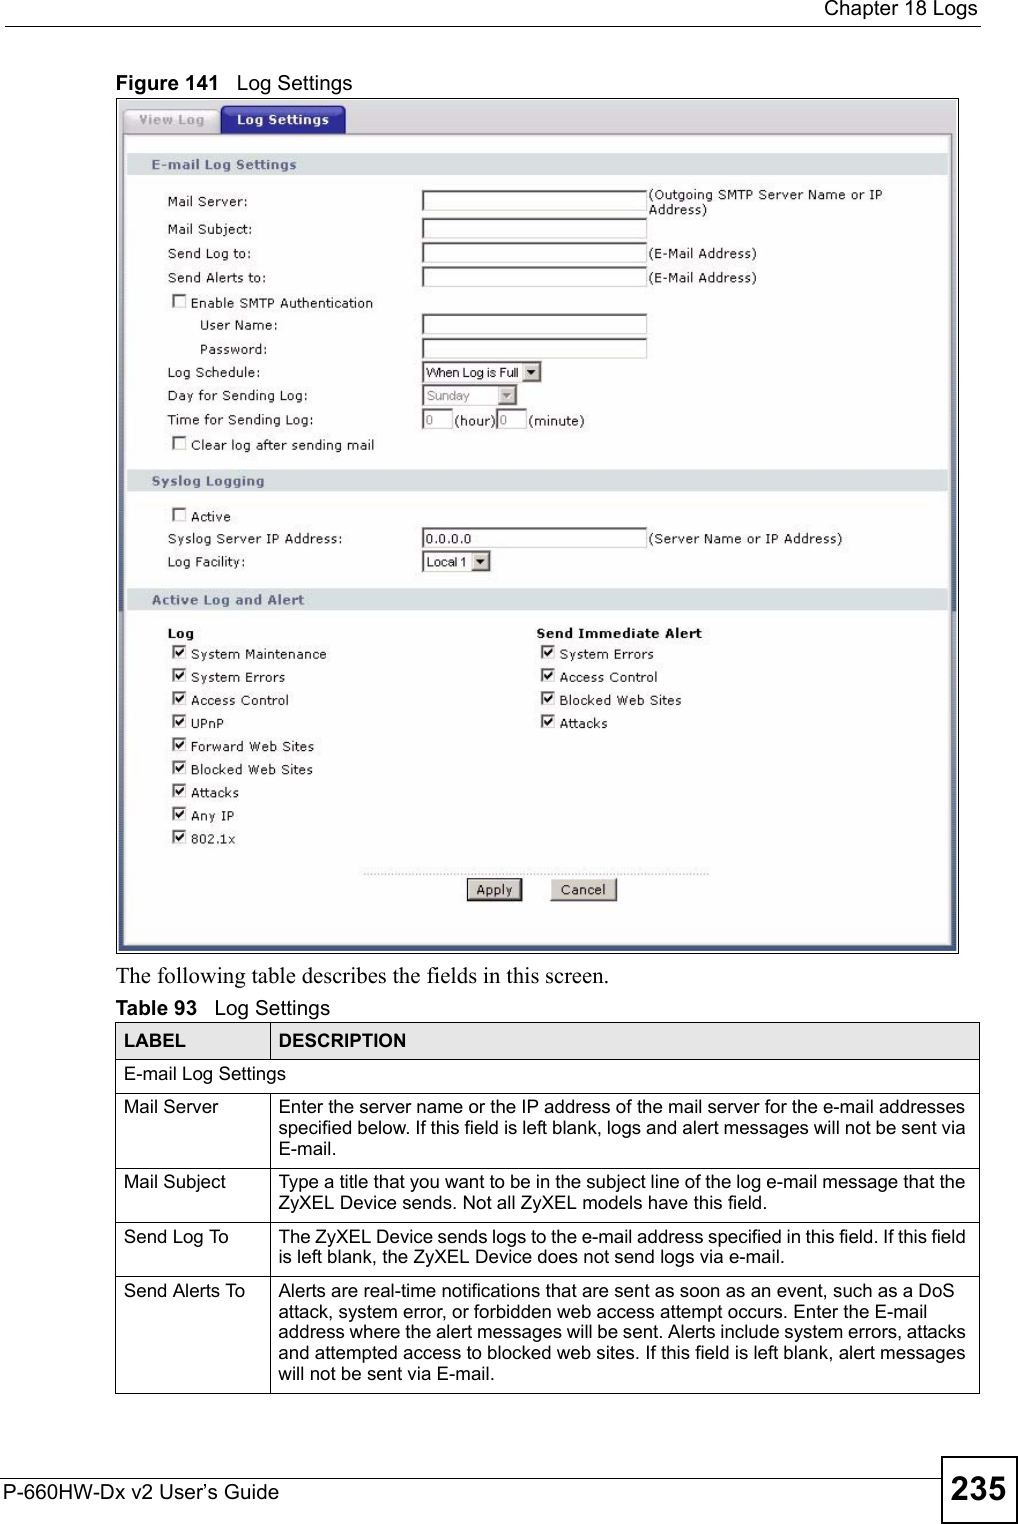  Chapter 18 LogsP-660HW-Dx v2 User’s Guide 235Figure 141   Log SettingsThe following table describes the fields in this screen.Table 93   Log SettingsLABEL DESCRIPTIONE-mail Log SettingsMail Server  Enter the server name or the IP address of the mail server for the e-mail addresses specified below. If this field is left blank, logs and alert messages will not be sent via E-mail. Mail Subject Type a title that you want to be in the subject line of the log e-mail message that the ZyXEL Device sends. Not all ZyXEL models have this field.Send Log To  The ZyXEL Device sends logs to the e-mail address specified in this field. If this field is left blank, the ZyXEL Device does not send logs via e-mail. Send Alerts To  Alerts are real-time notifications that are sent as soon as an event, such as a DoS attack, system error, or forbidden web access attempt occurs. Enter the E-mail address where the alert messages will be sent. Alerts include system errors, attacks and attempted access to blocked web sites. If this field is left blank, alert messages will not be sent via E-mail. 